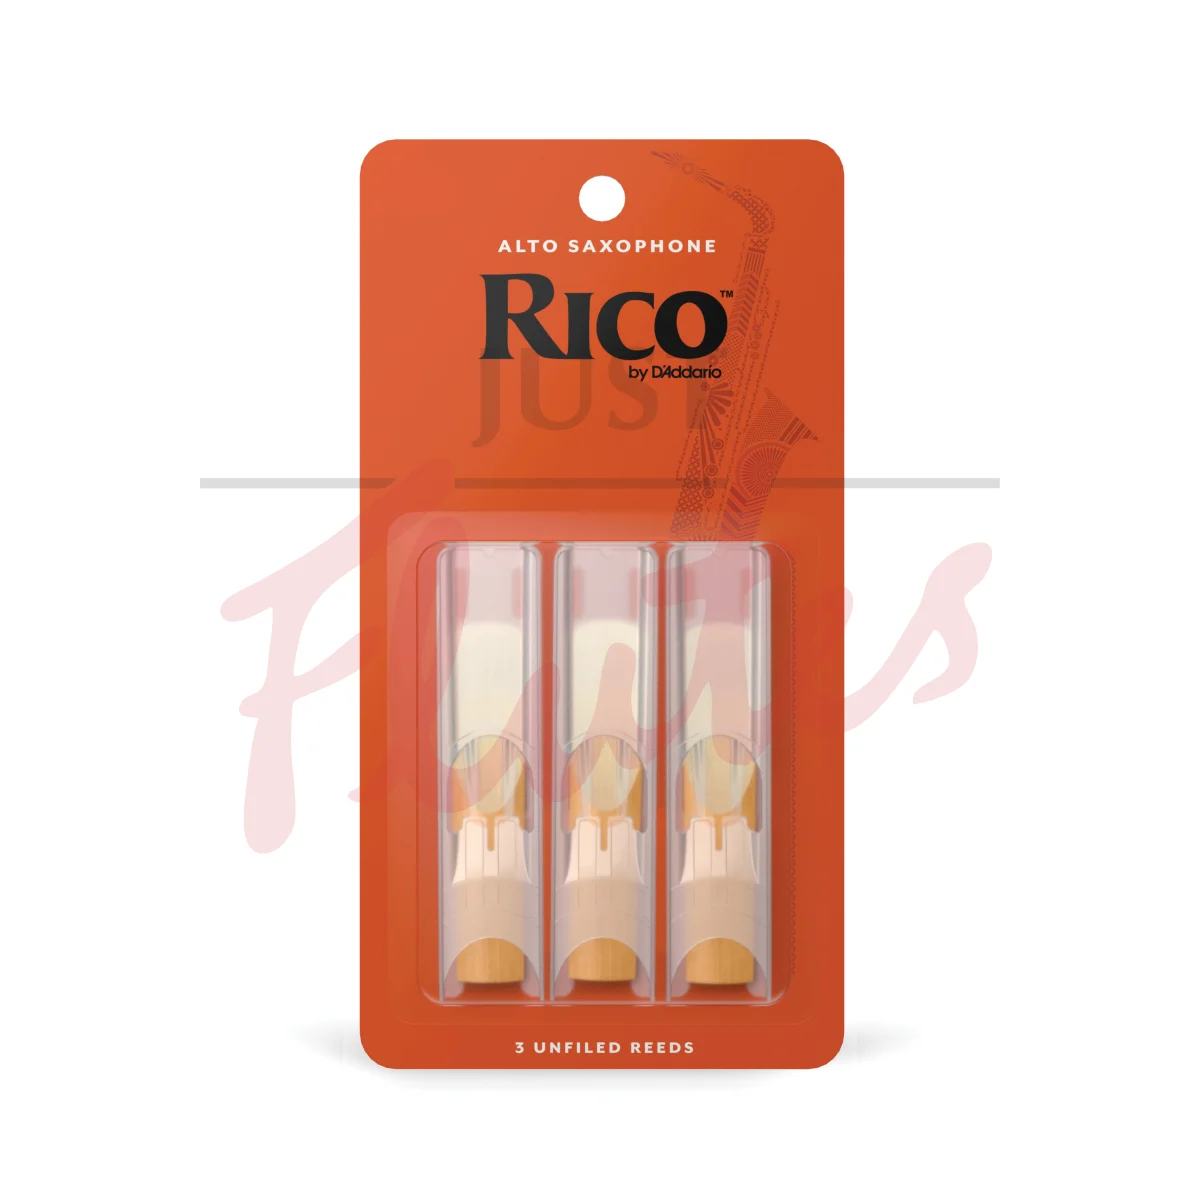 Rico by D'Addario RJA0330 Alto Saxophone Reeds, Strength 3, Pack of 3